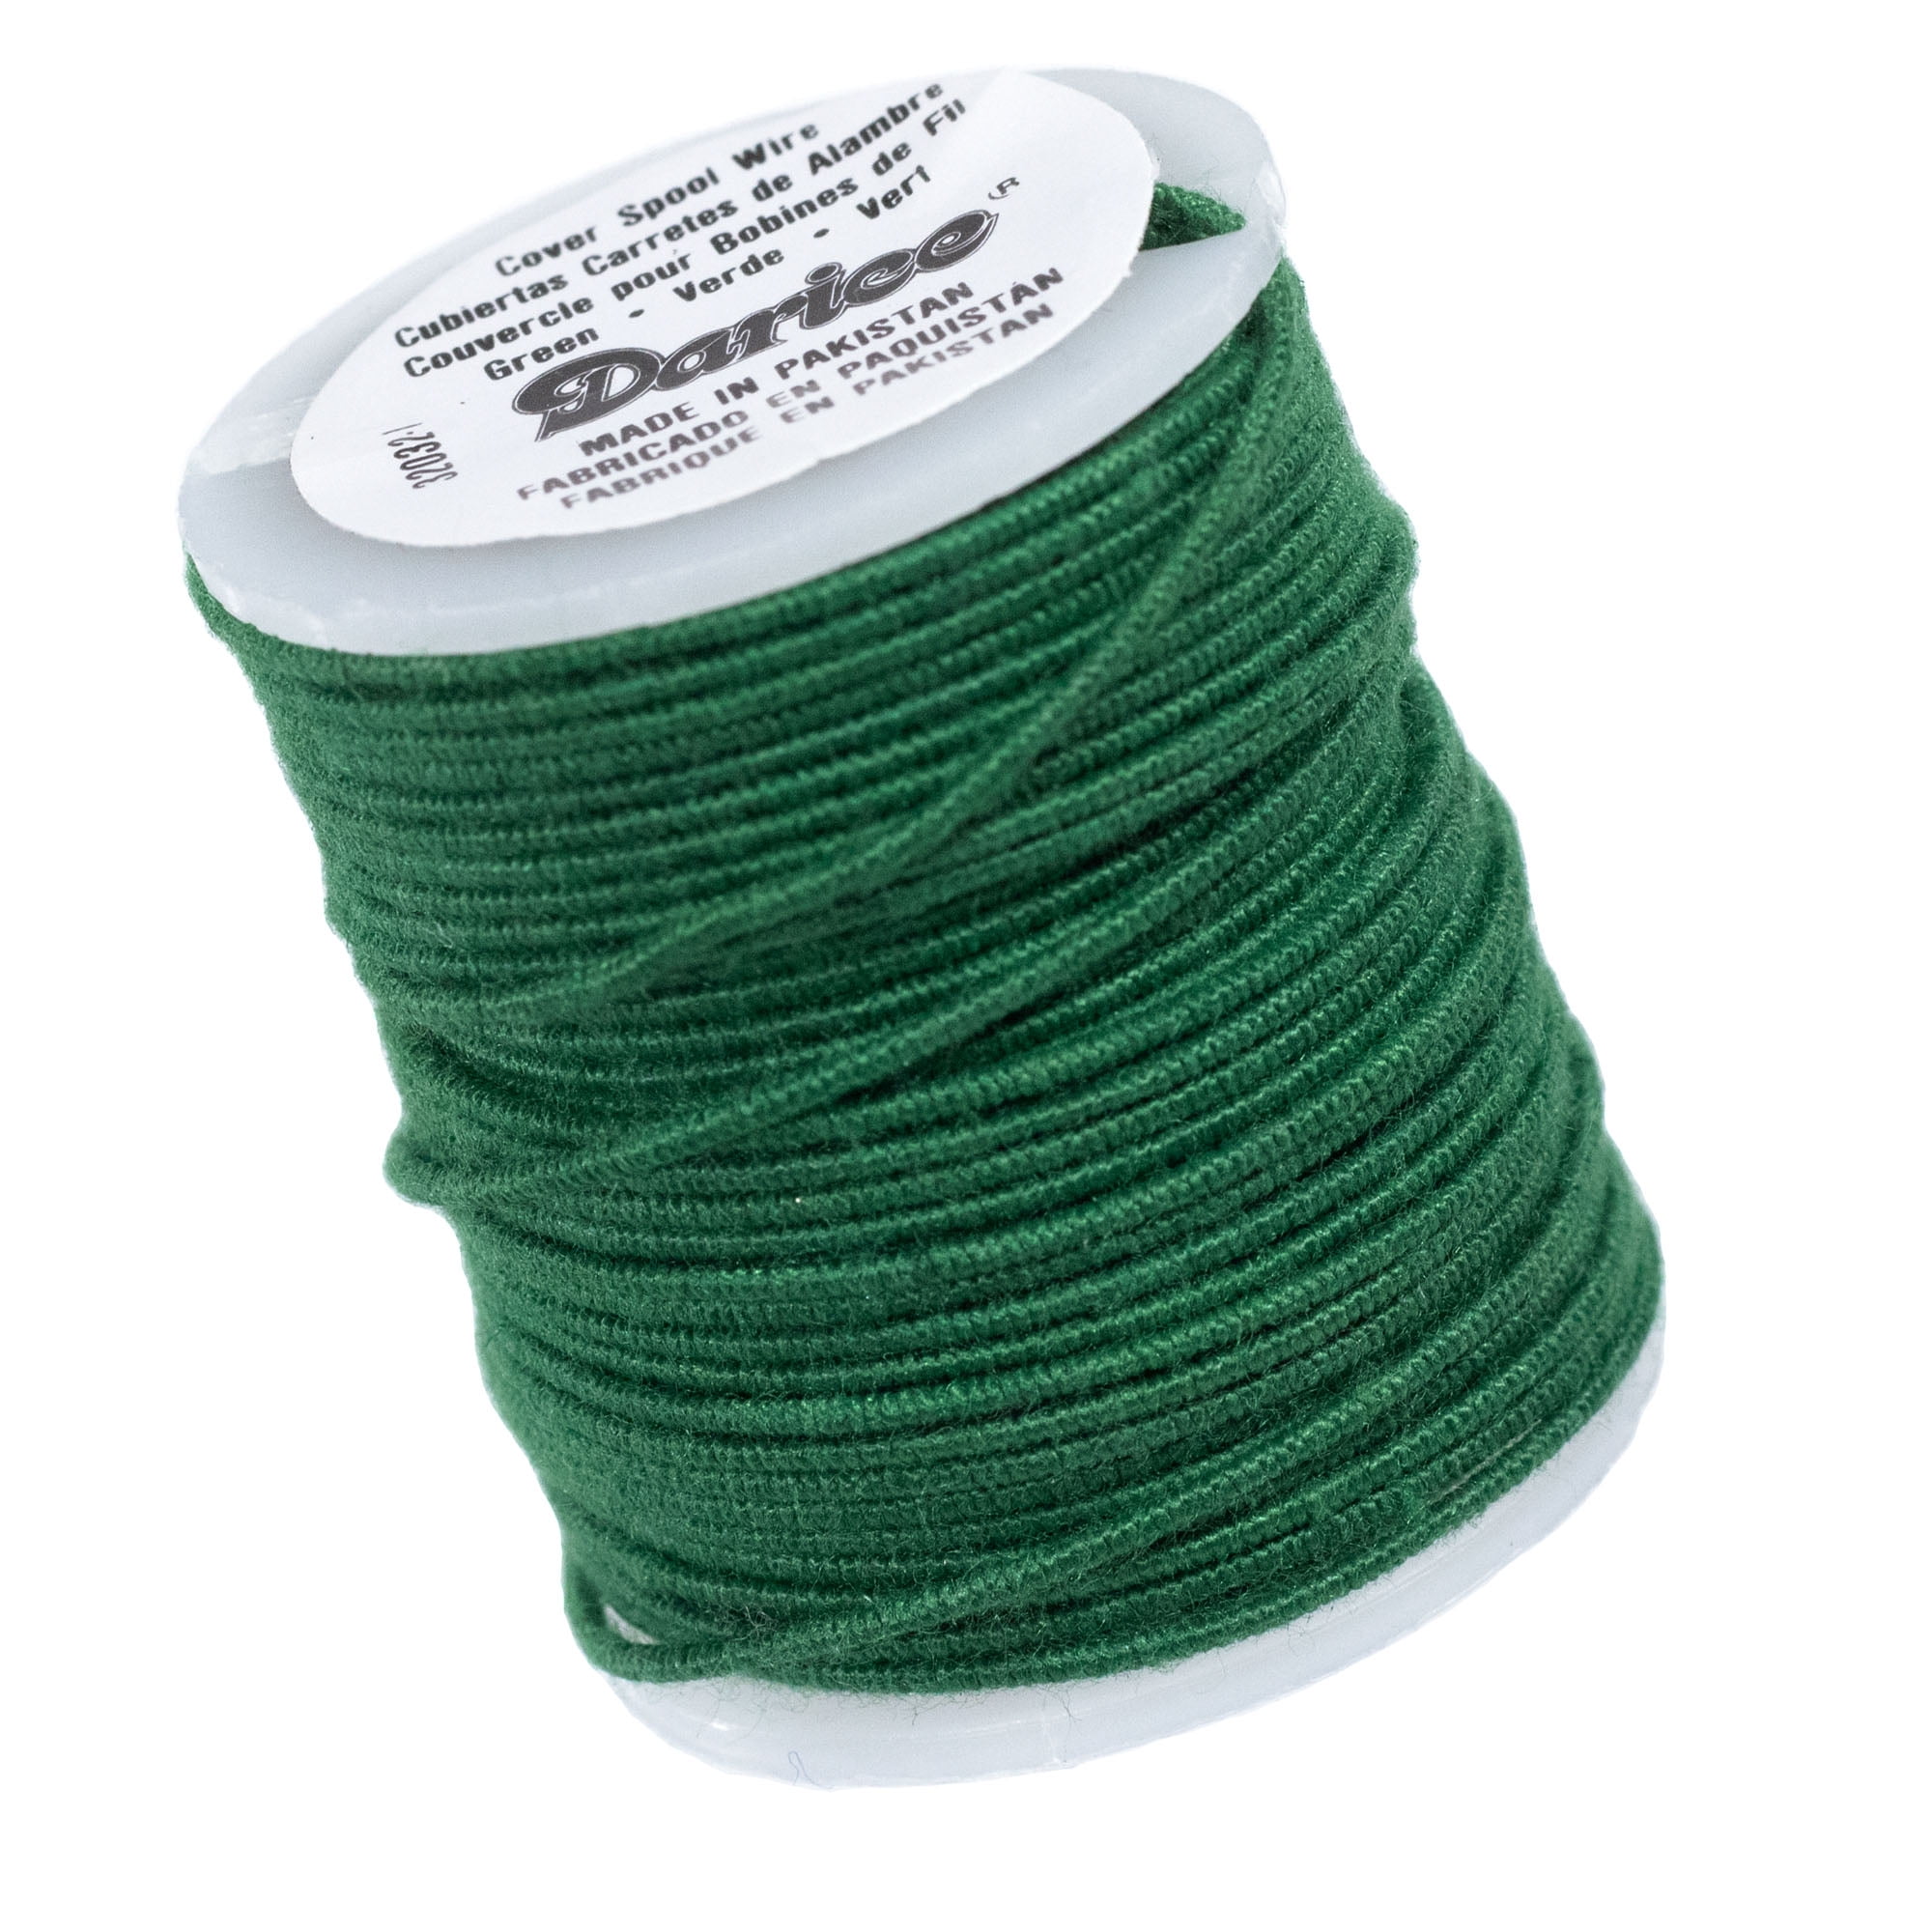 32038-1 12-Pack Bulk Buy: Darice DIY Crafts Wire Cloth Covered Green 22 gauge 18 inches 20 pieces